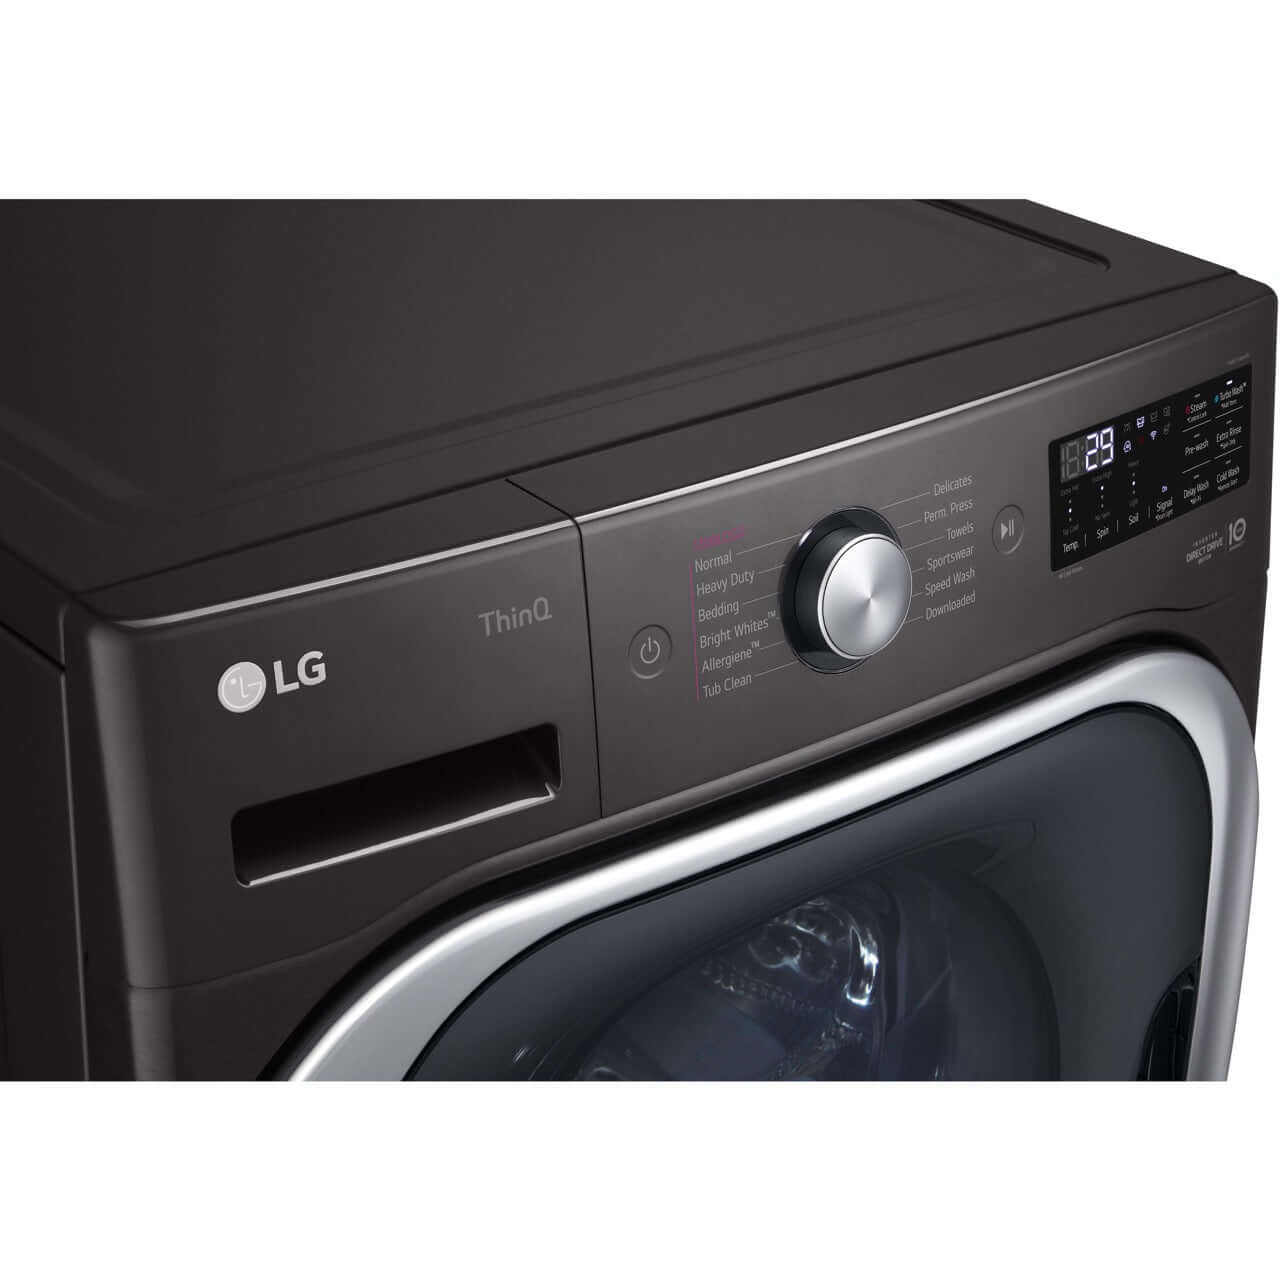 LG 5.2-Cu. Ft. Mega Capacity Smart wi-fi Enabled Front Load Washer with TurboWash and Built-In Intelligence in Black Steel (WM8900HBA)